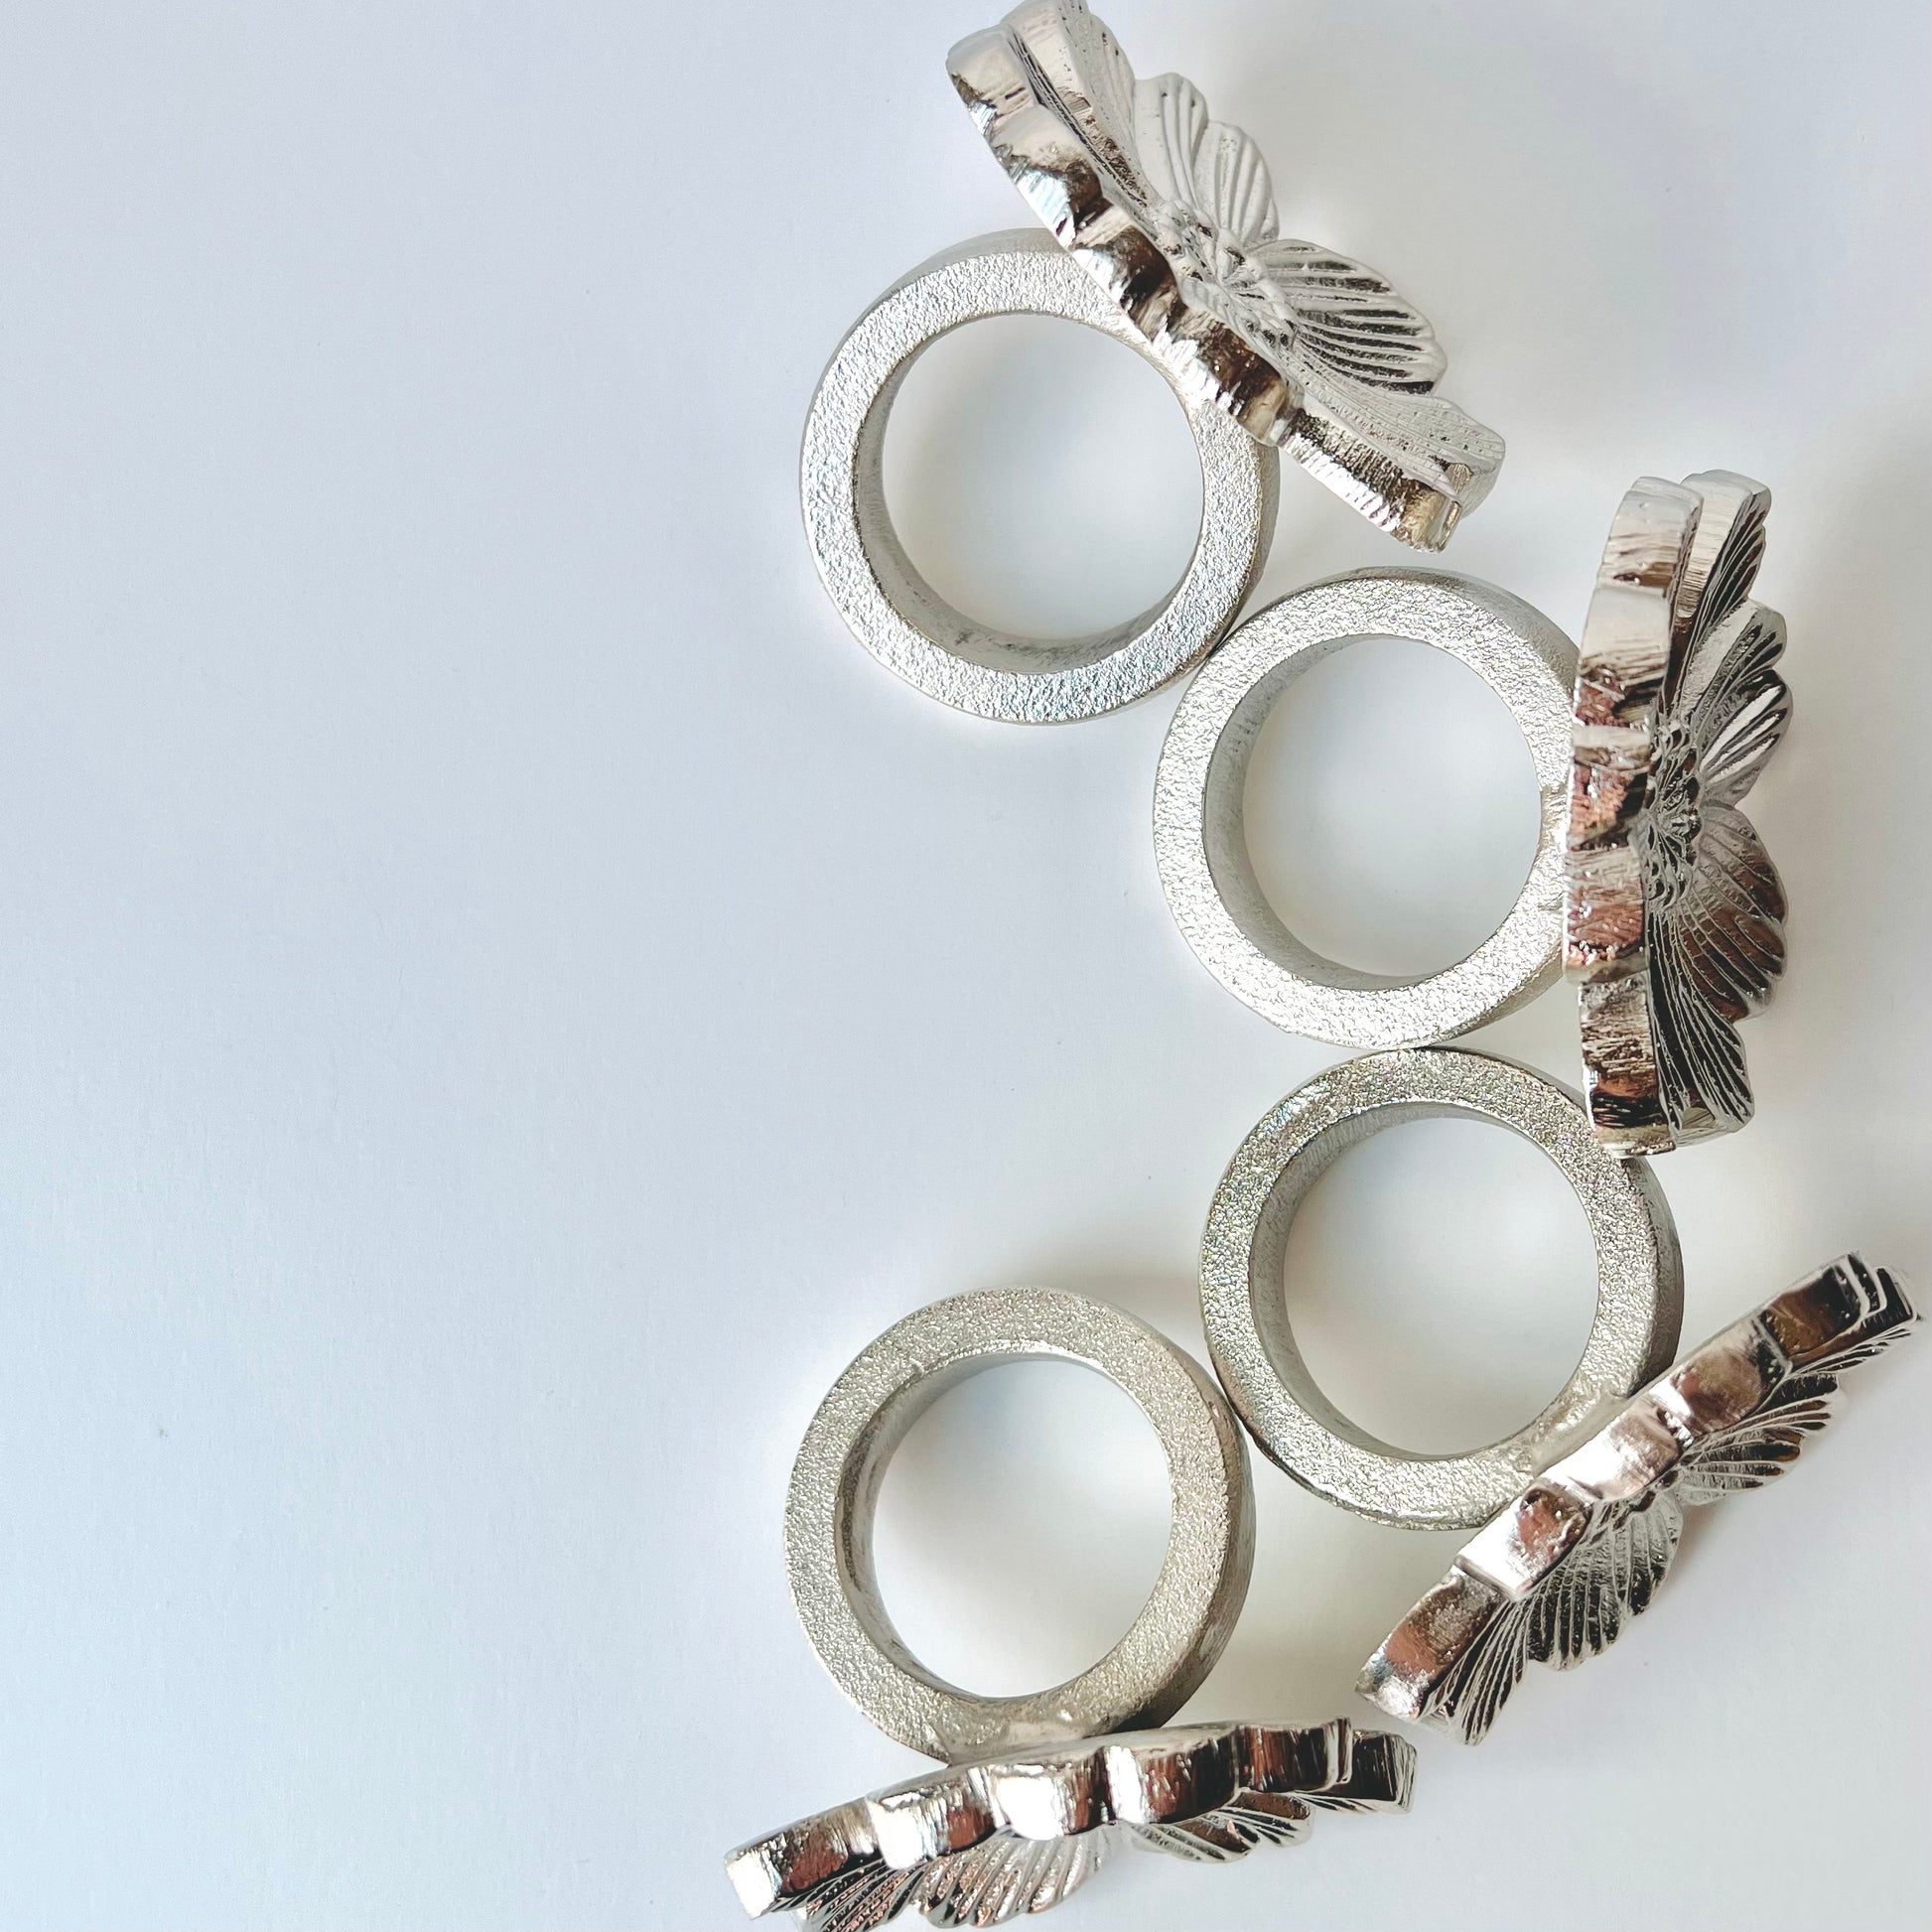 A set of four silver flower napkin rings shown from overhead to show their rings and front decorations